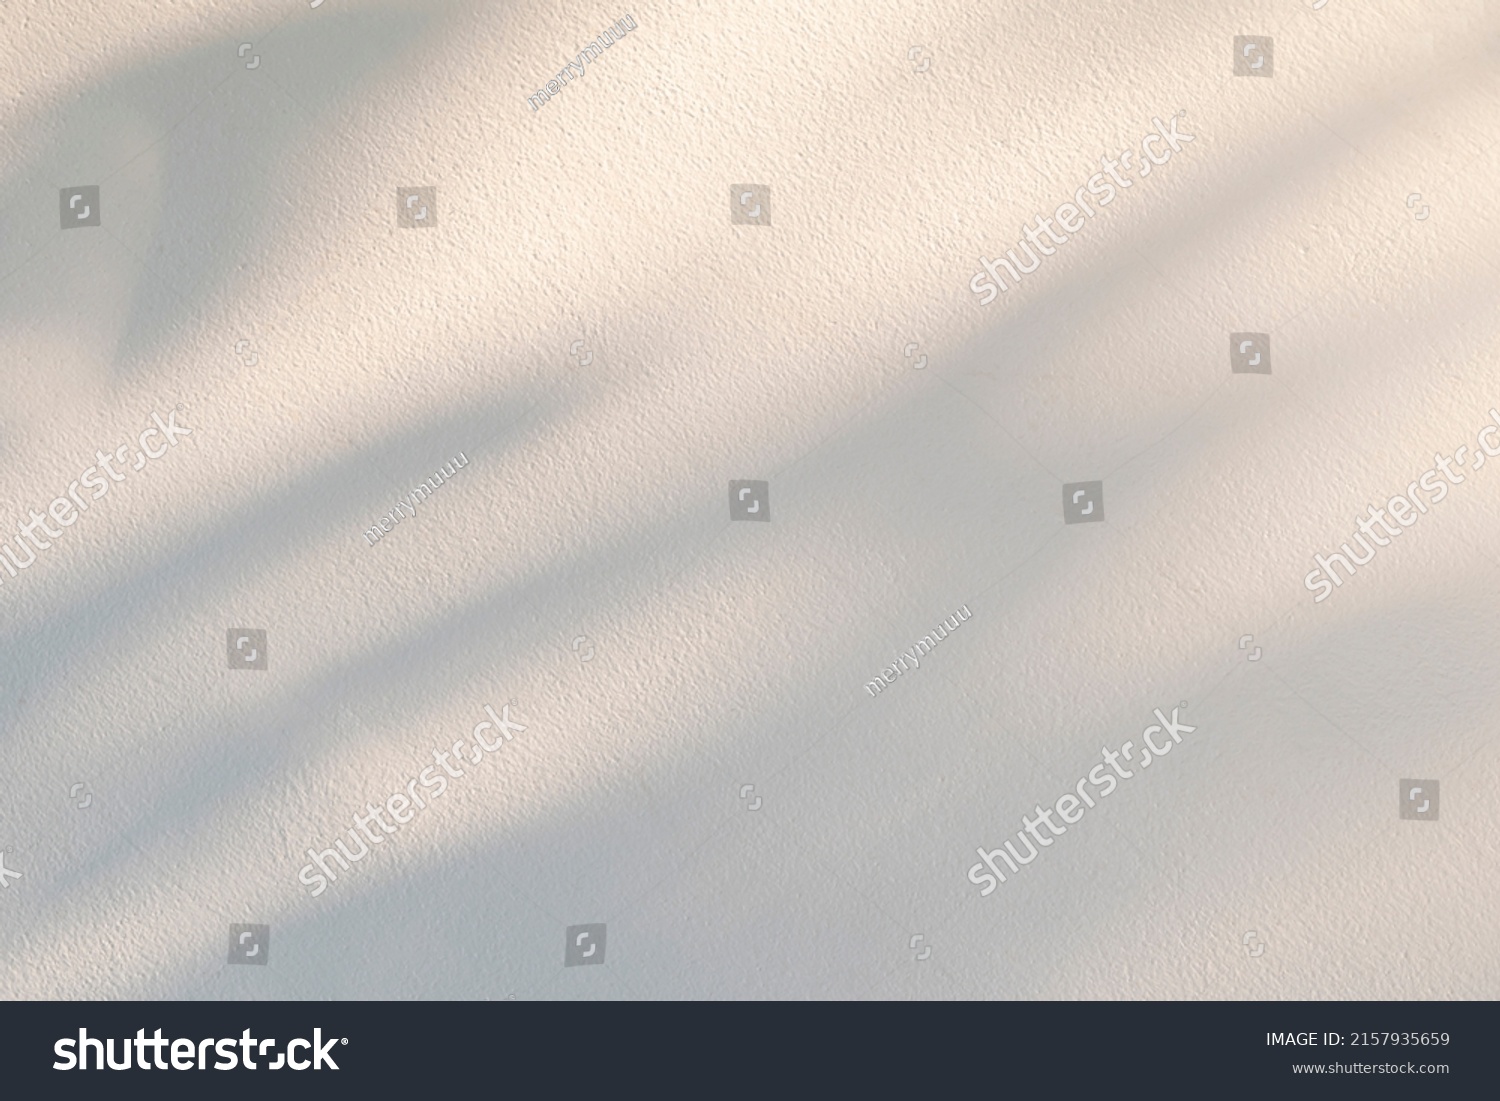 Light and shadow of leaf abstract grey background. Natural shadows and sunshine diagonal refraction on white concrete wall texture. Shadow overlay effect for foliage mockup, banner graphic layout
 #2157935659